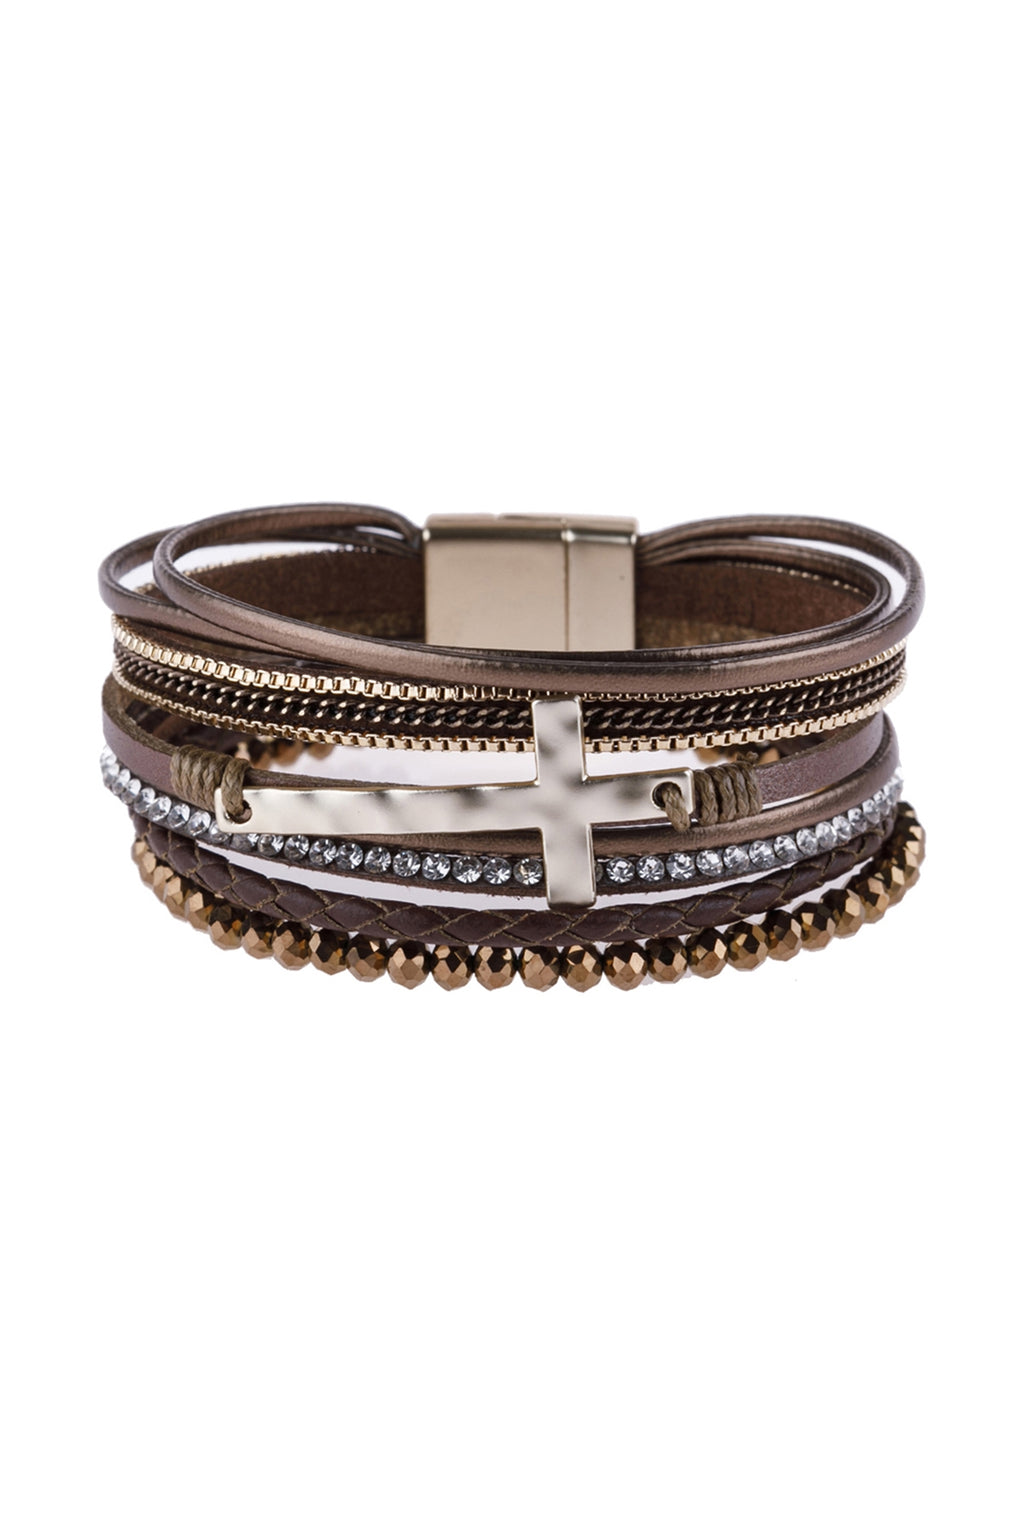 Brown Cross Leather Wrap Glass Beads Magnetic Bracelet - Pack of 6